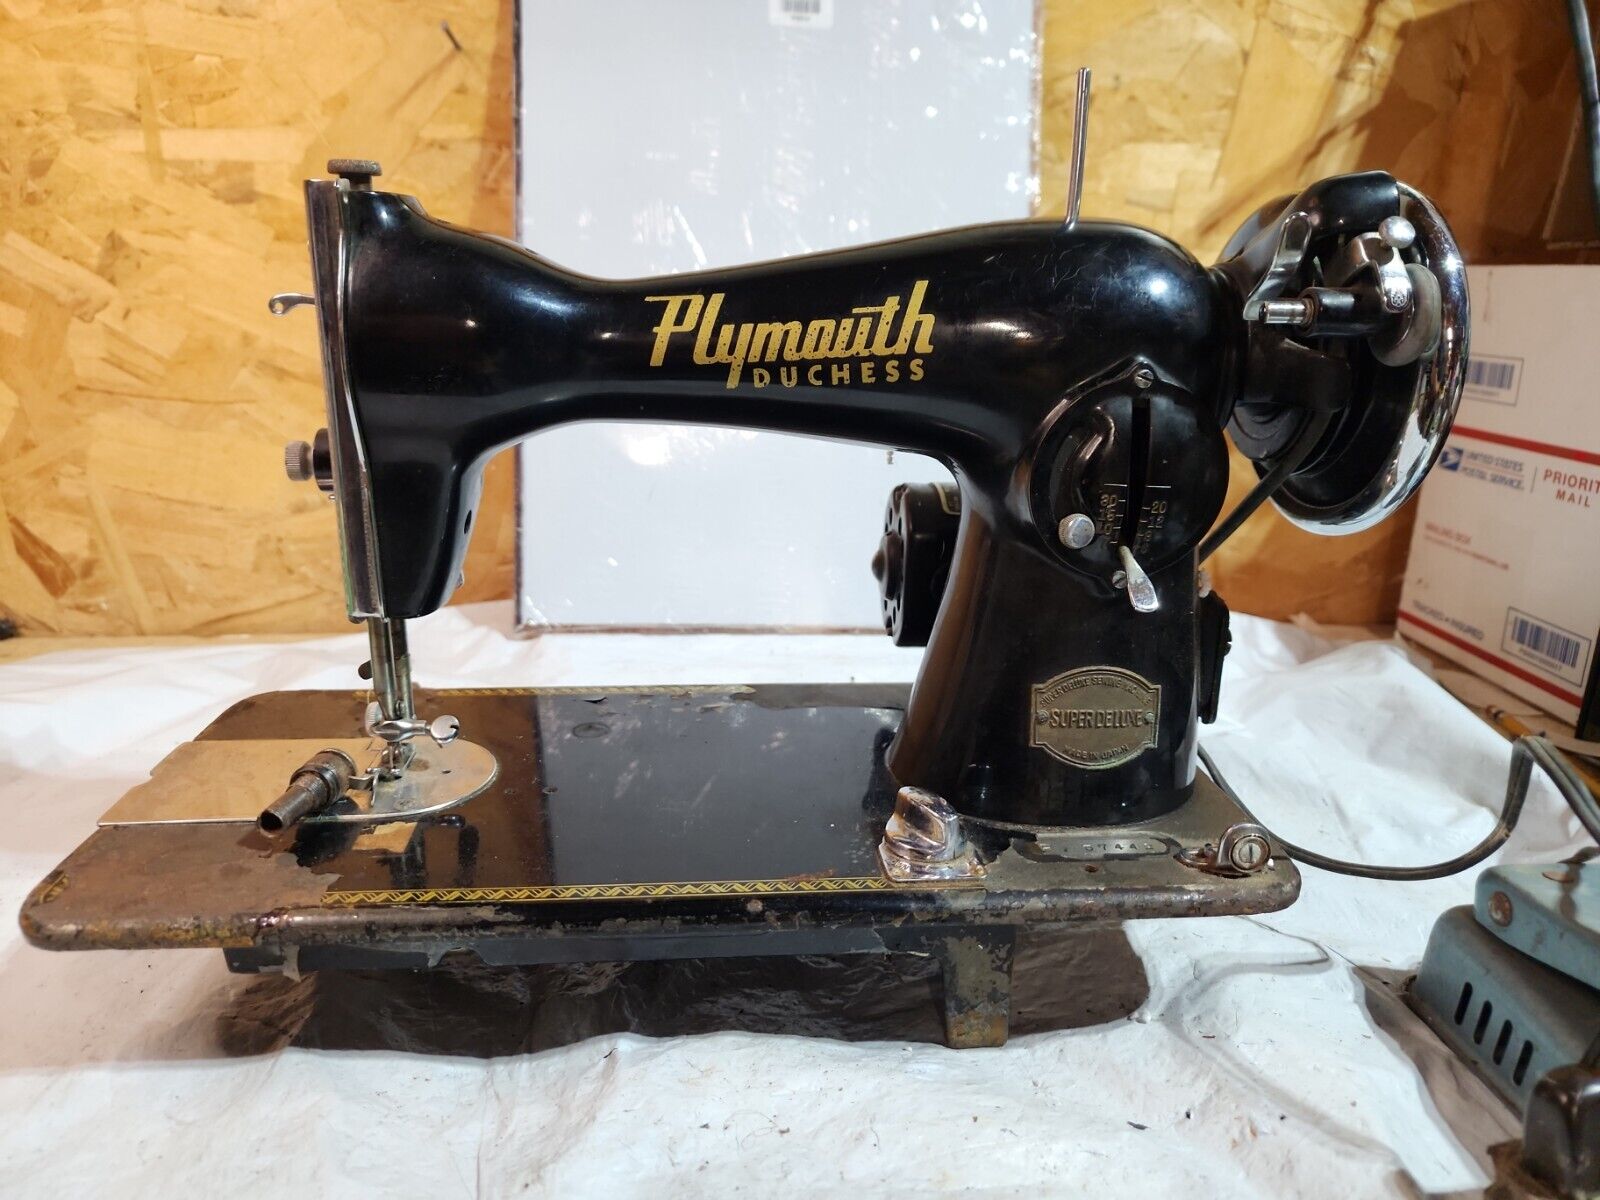 Antique PLYMOUTH DUCHESS Model 24 Super Deluxe Sewing Machine Japan Works 1940s